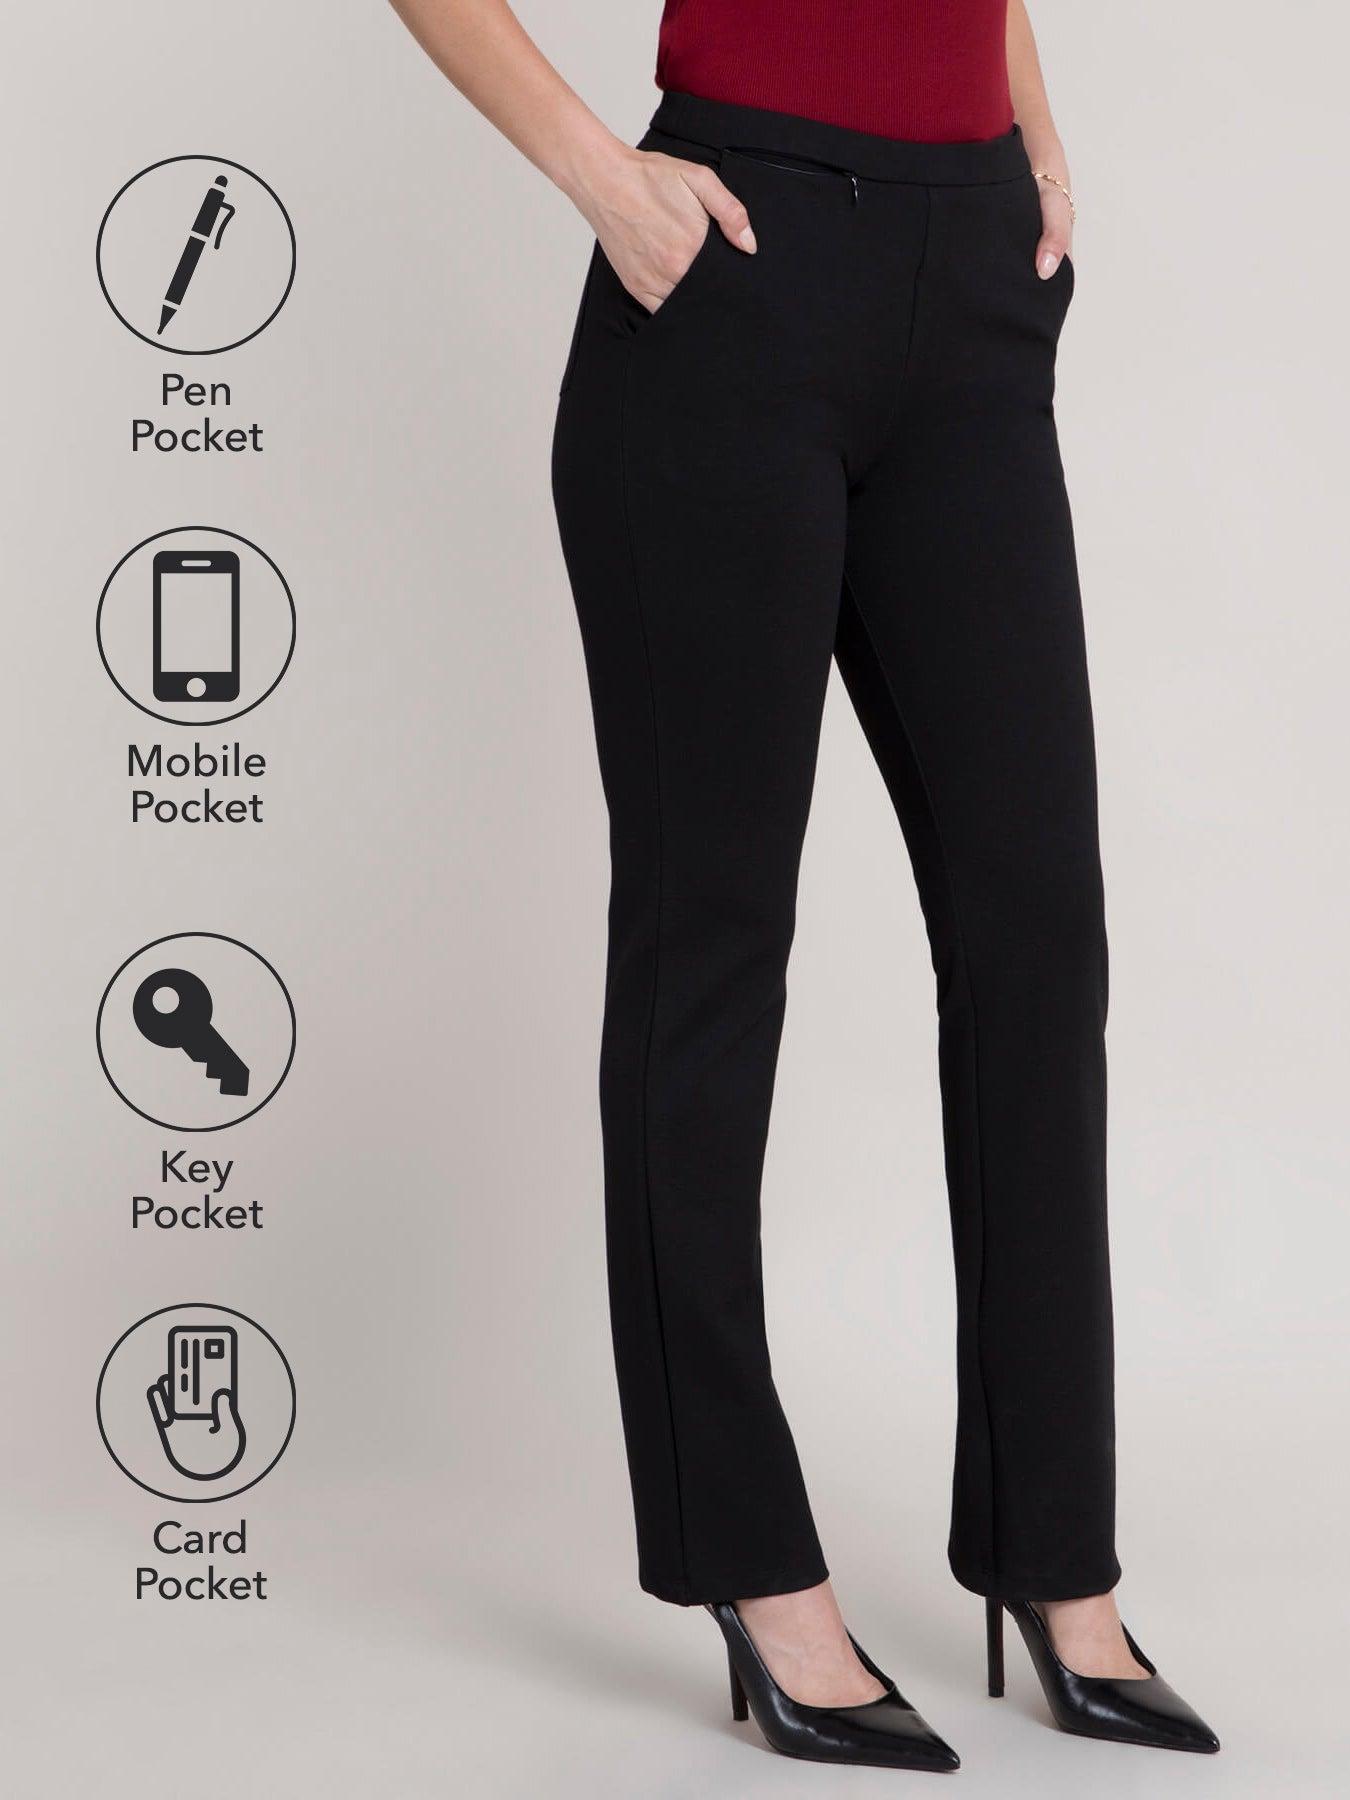 4 Way Stretch Bootcut LivIn Pants - Black| Formal Trousers